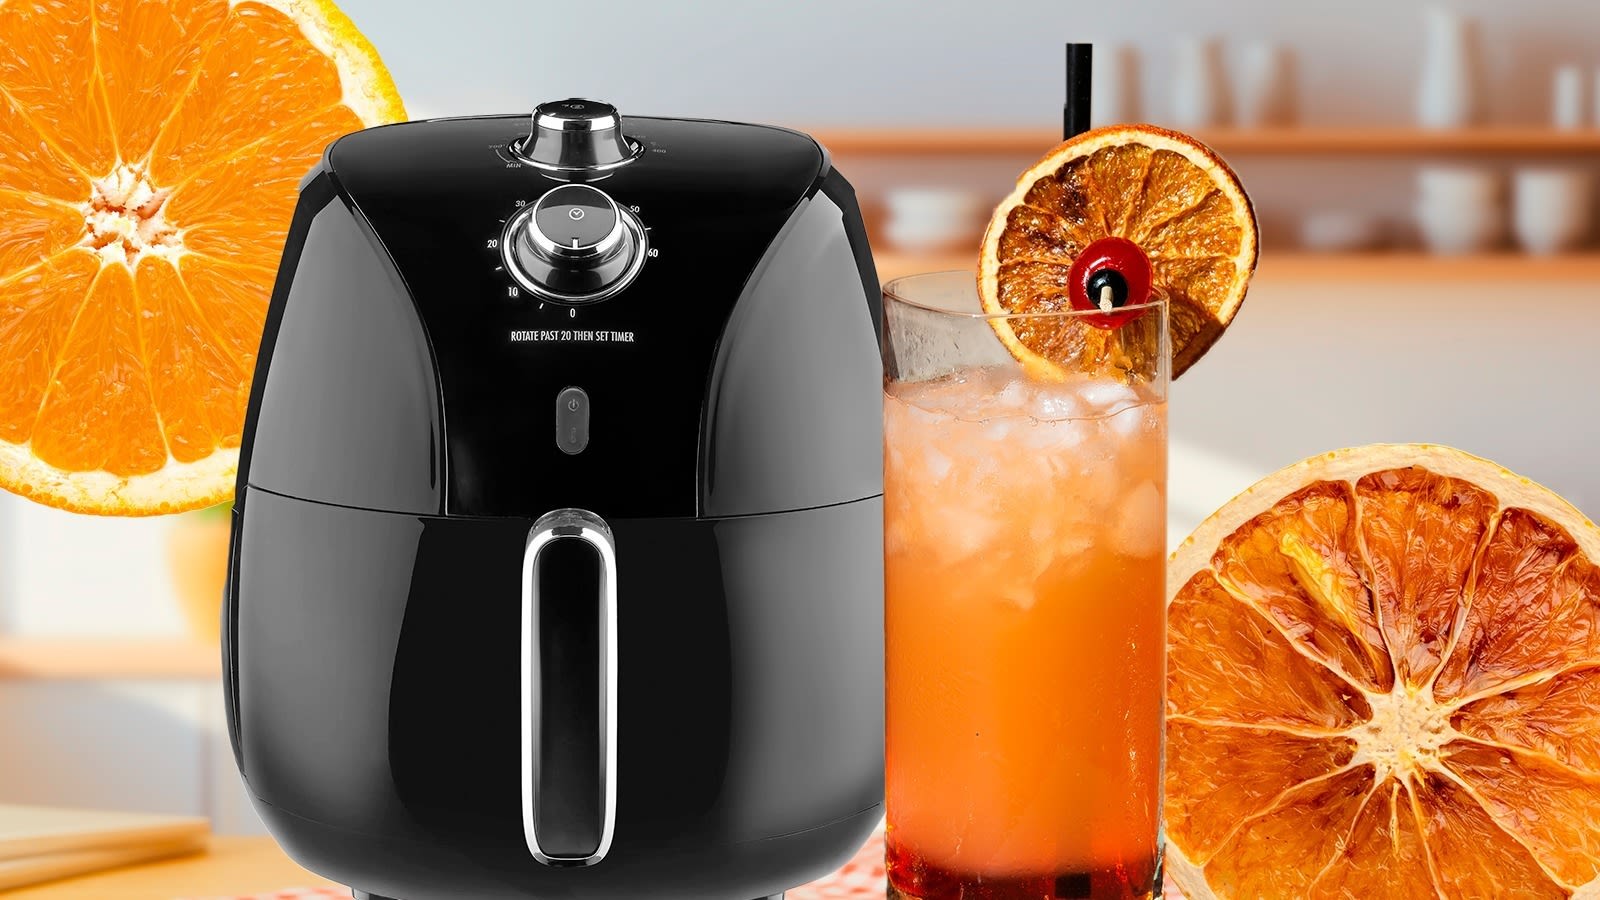 Dehydrate Citrus In Your Air Fryer For A Quick Cocktail Garnish